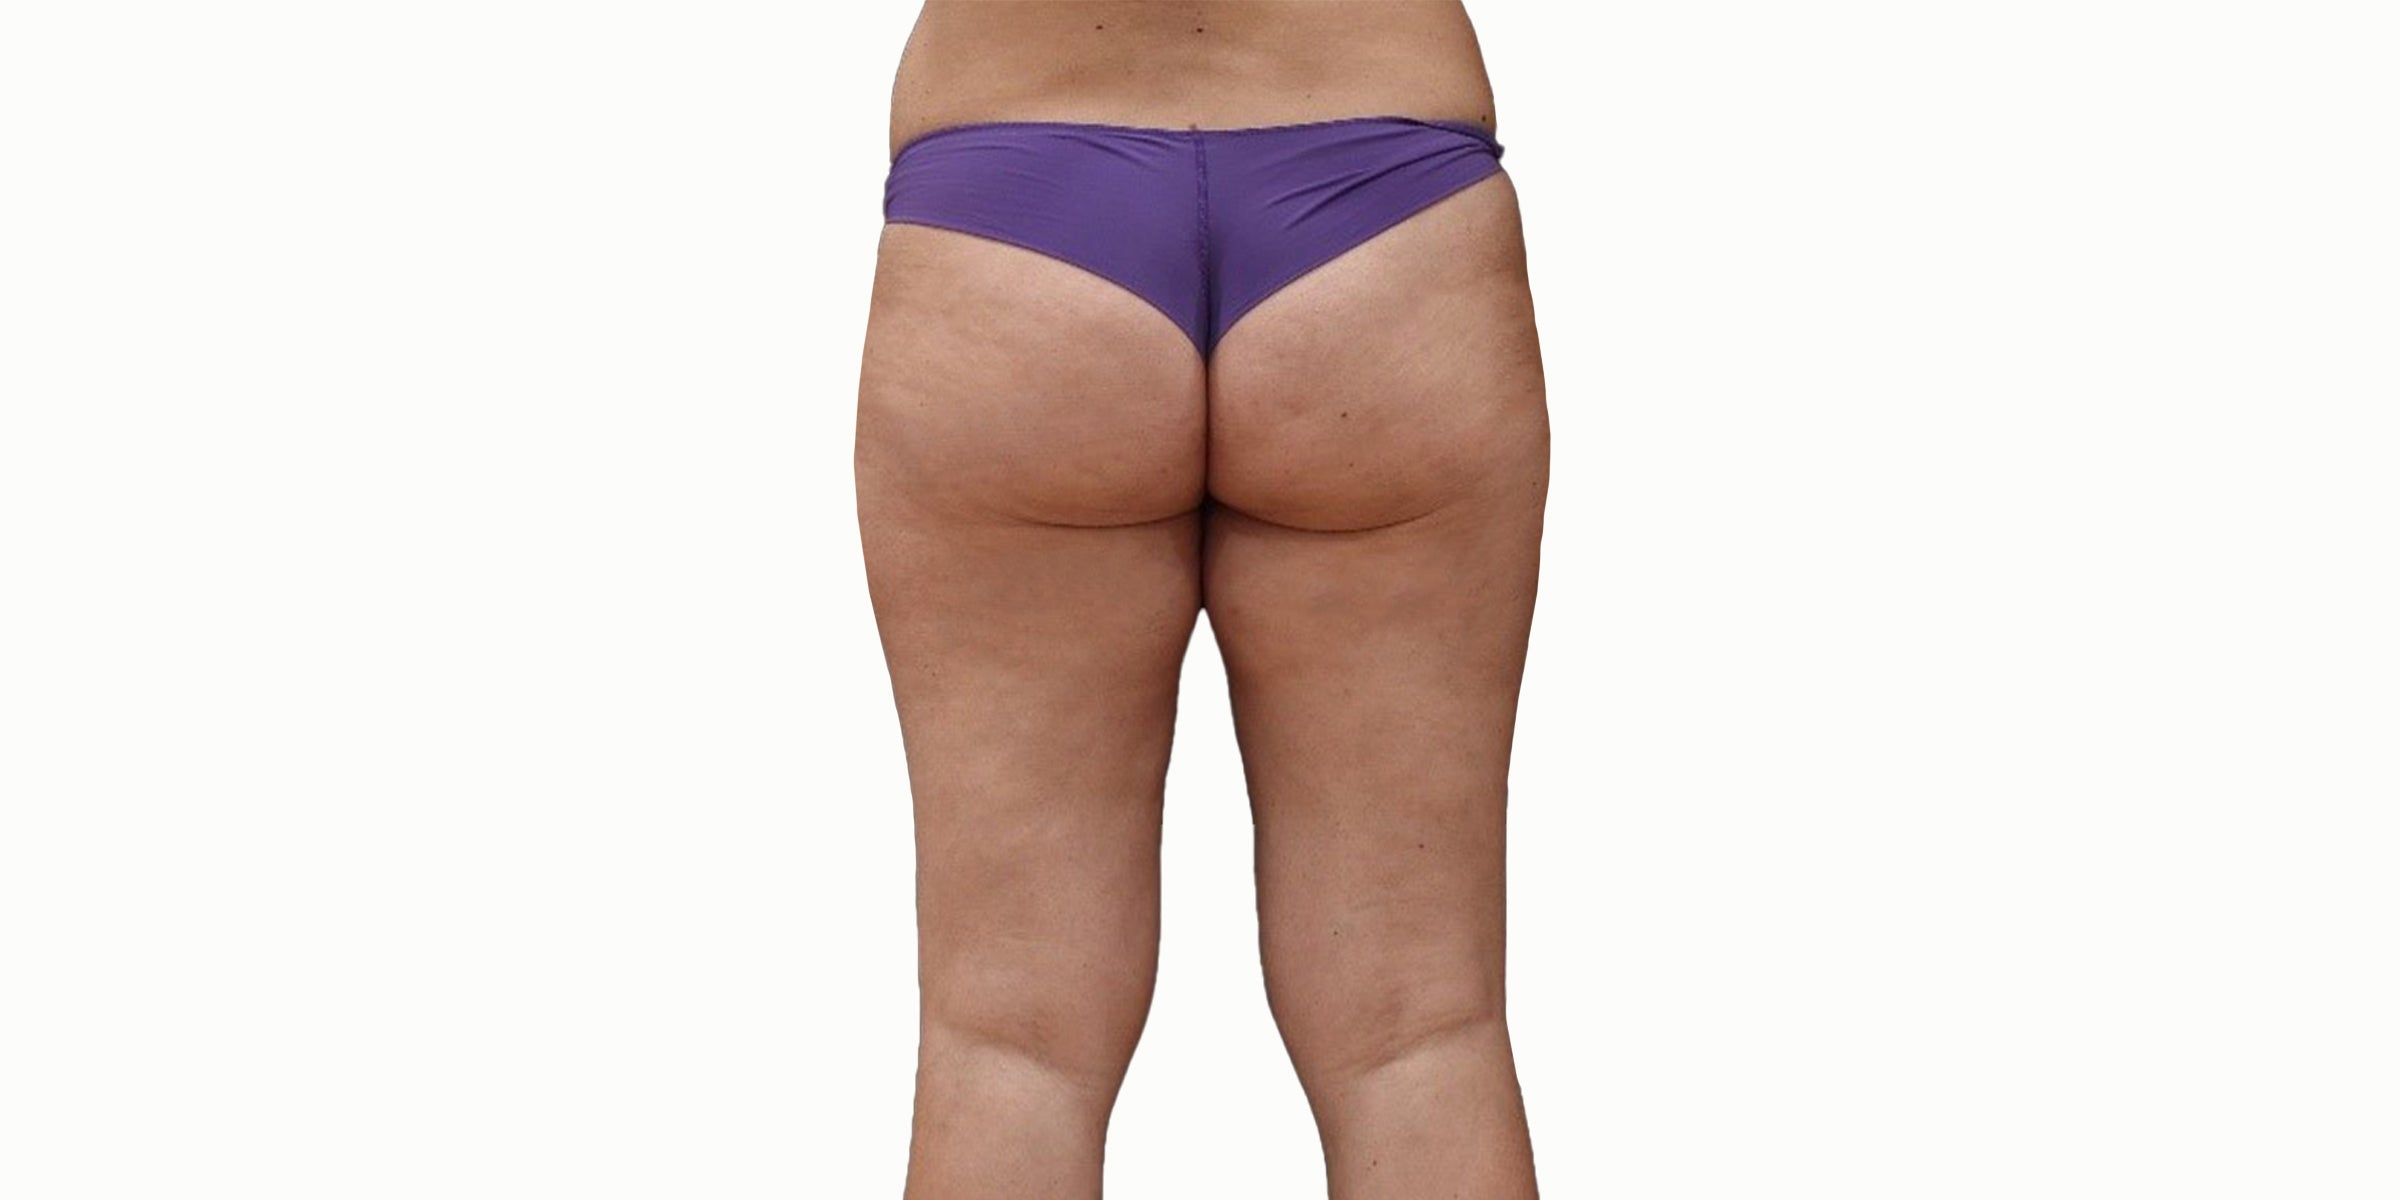 Legology cellulite before and after results